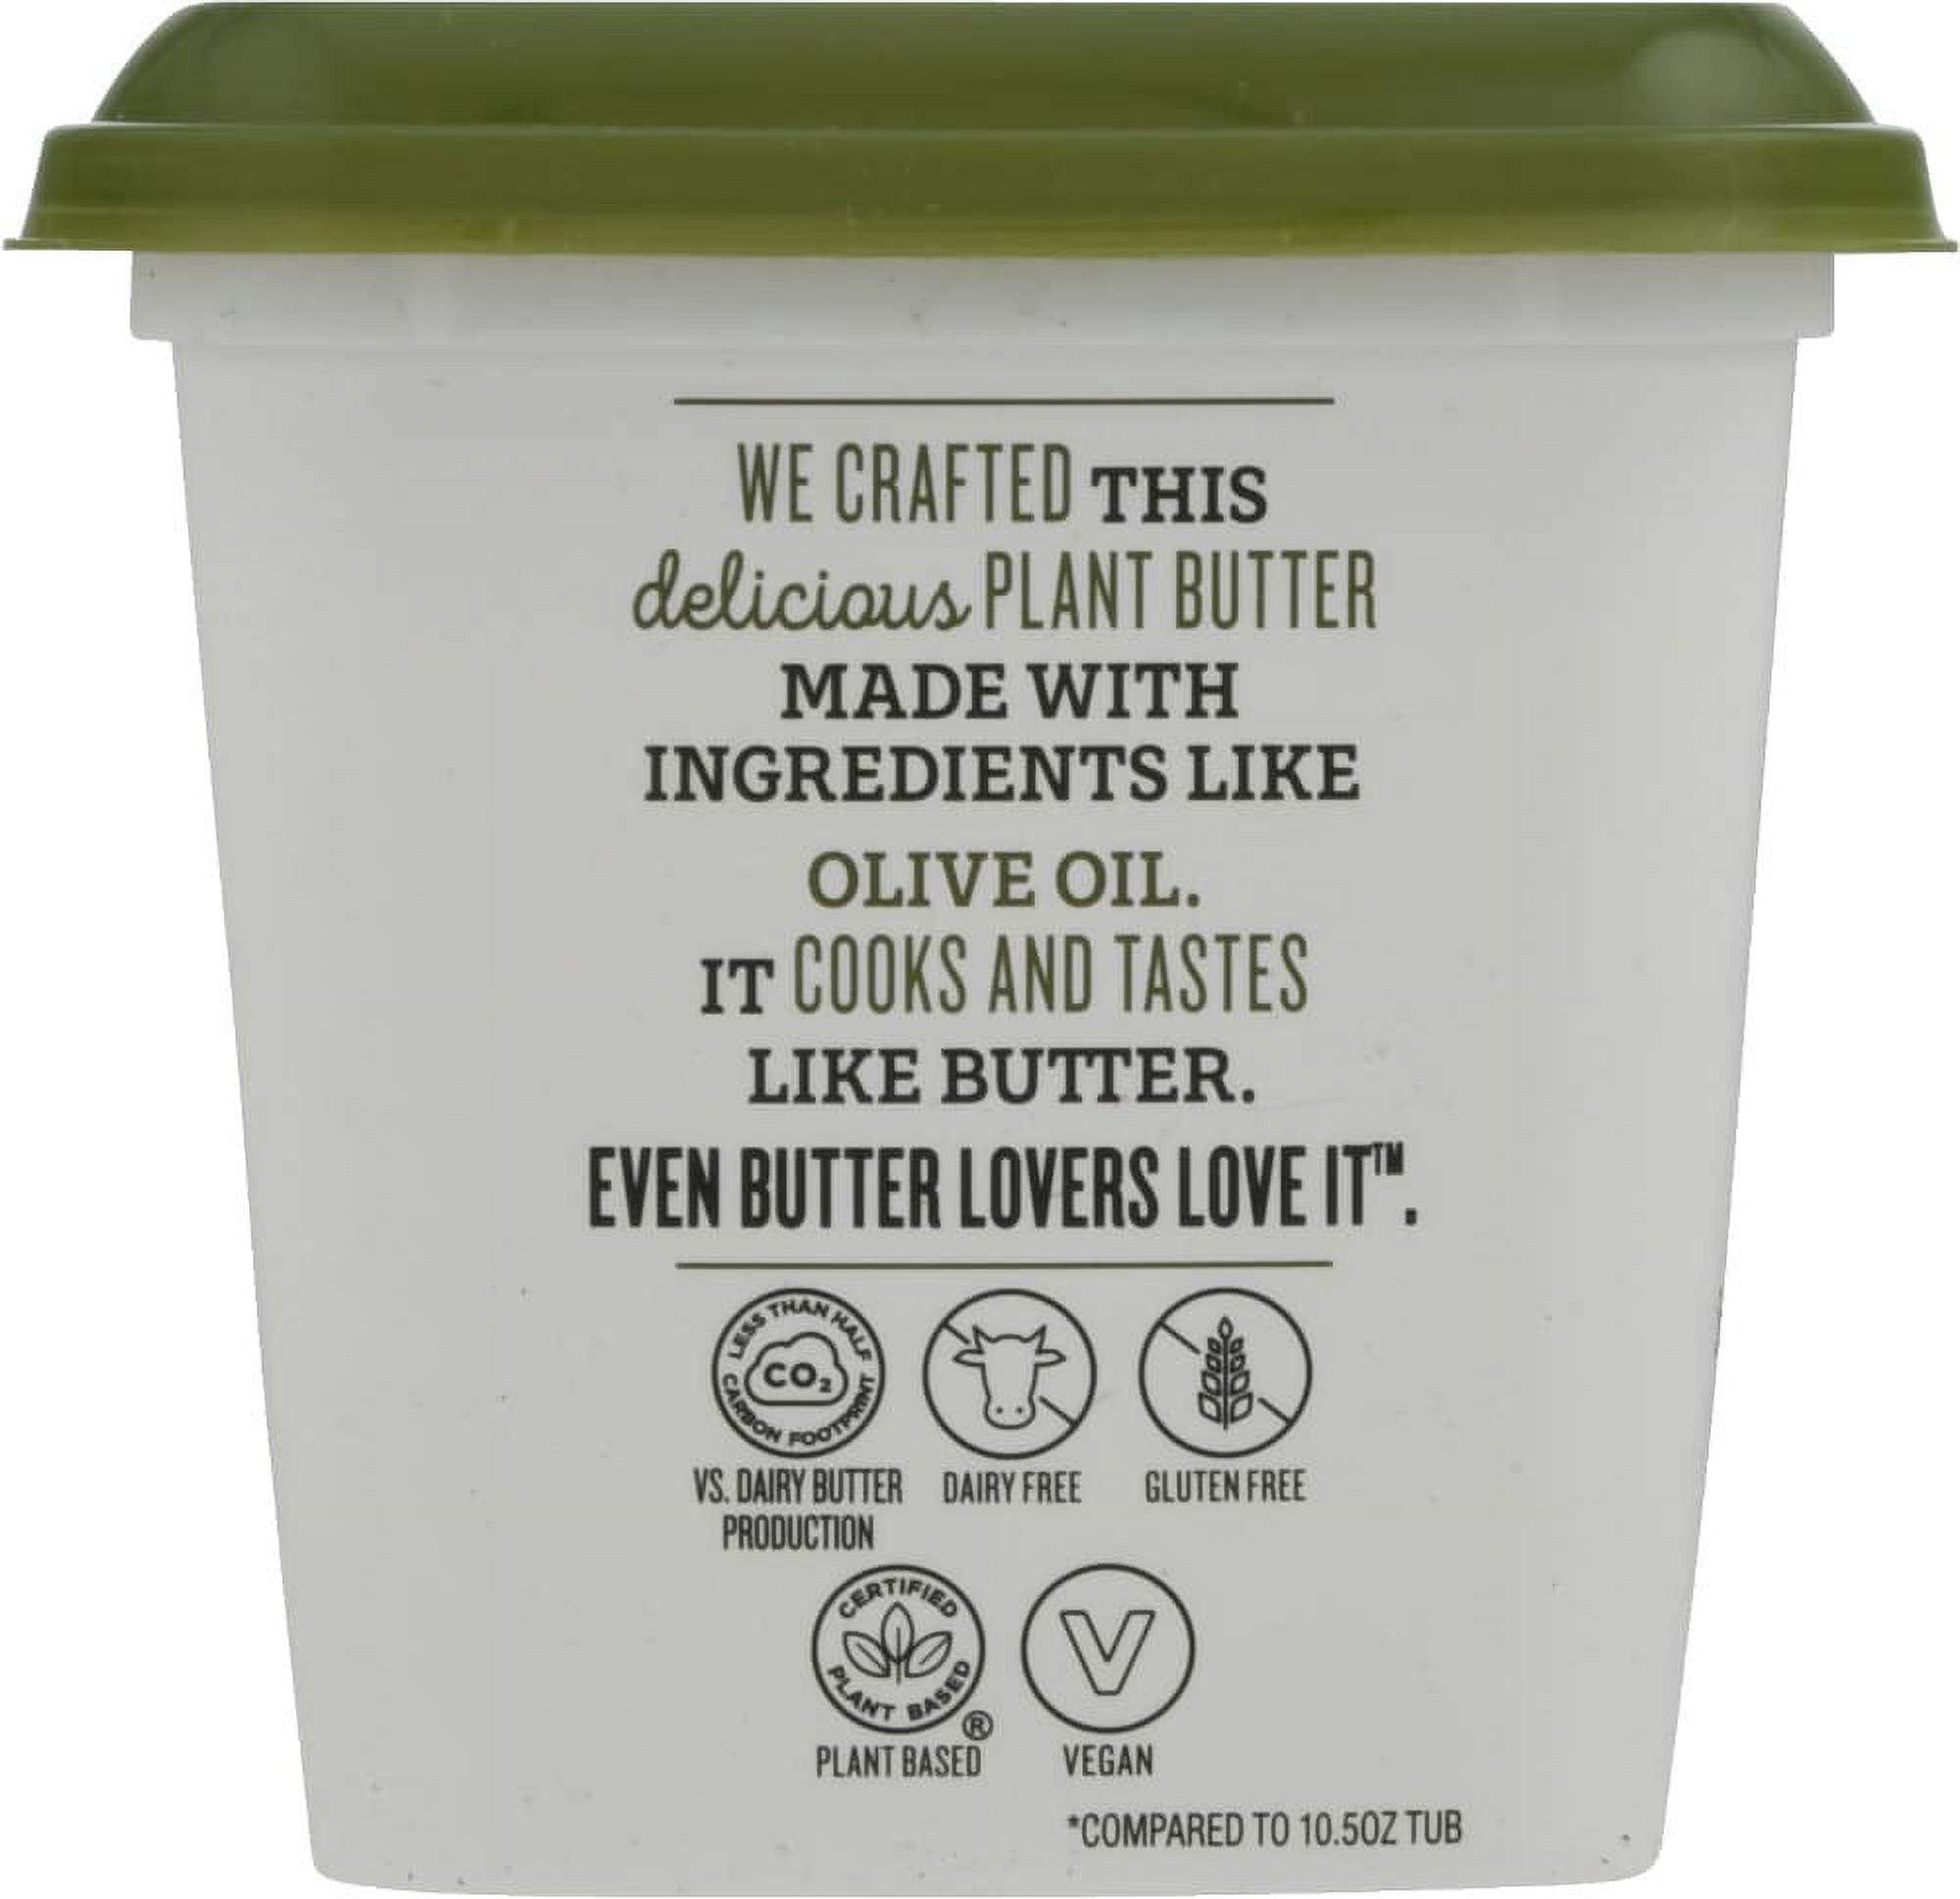 Country Crock Plant Butter with Olive Oil, 14 oz Tub (Refrigerated) - image 2 of 8